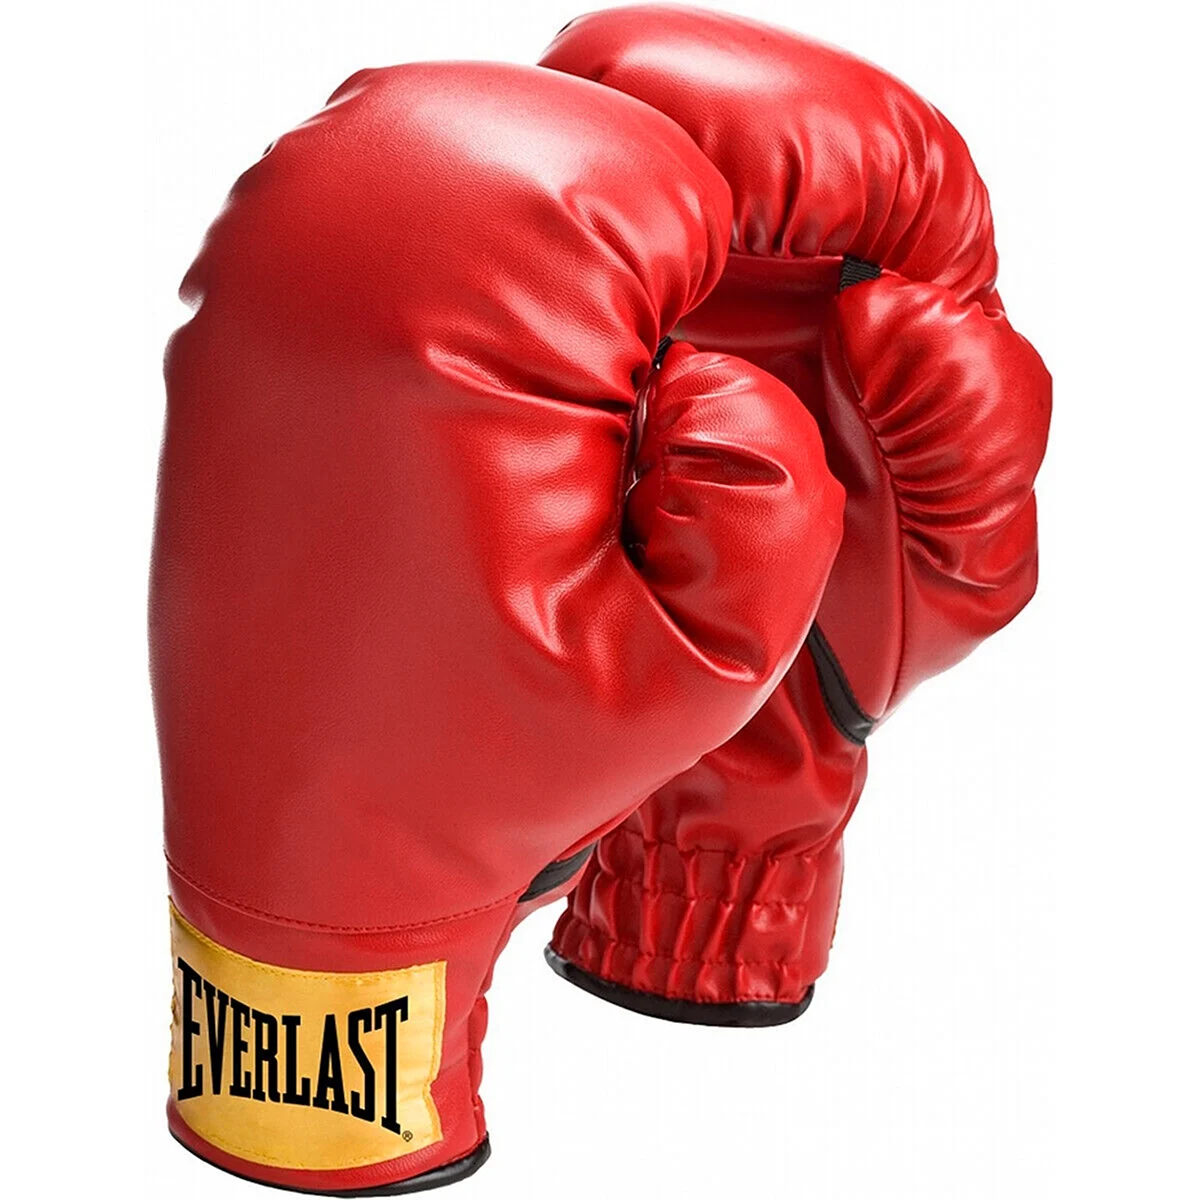 Everlast Boxing Gloves small